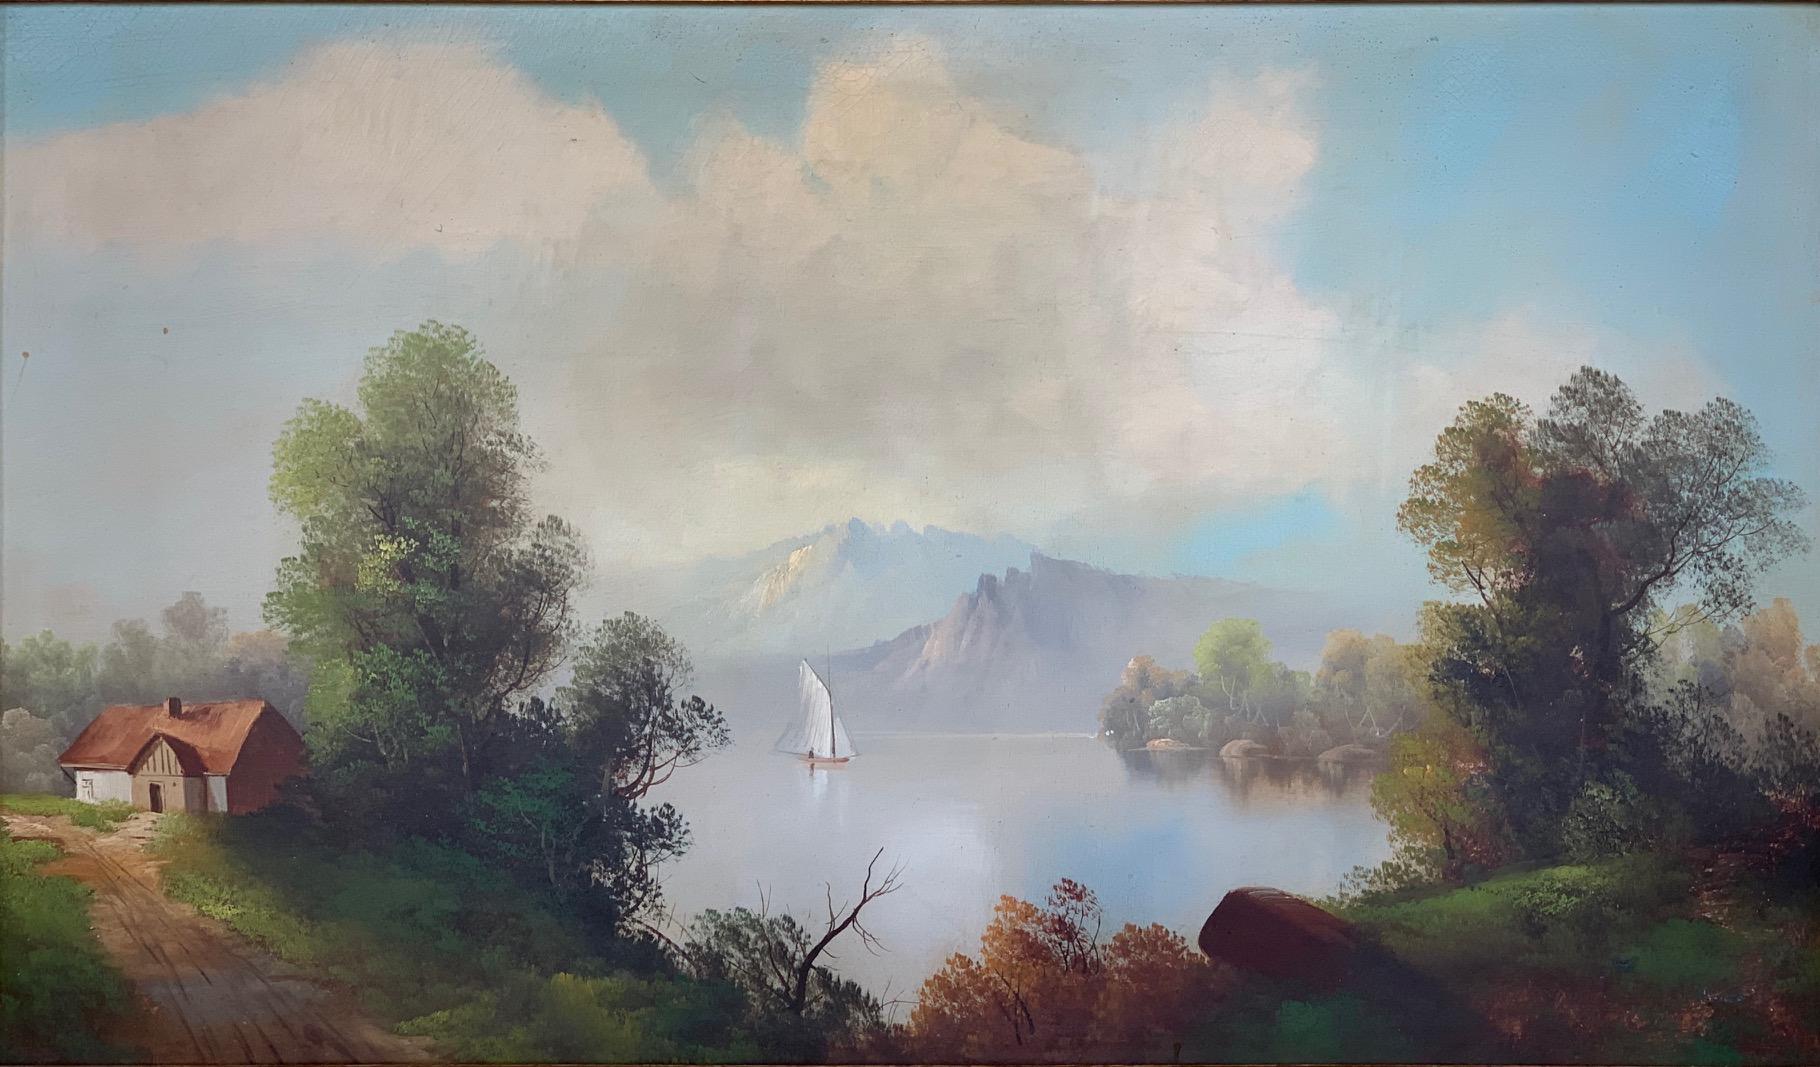 19th century oversized oil on canvas landscape depicting a home in the forest with a mountain range and a body of water with a boat.
Mounted on a wood and gild frame done in American Romanticism.
Measurements of the Canvas: H: 28 in x W: 46.5 in.